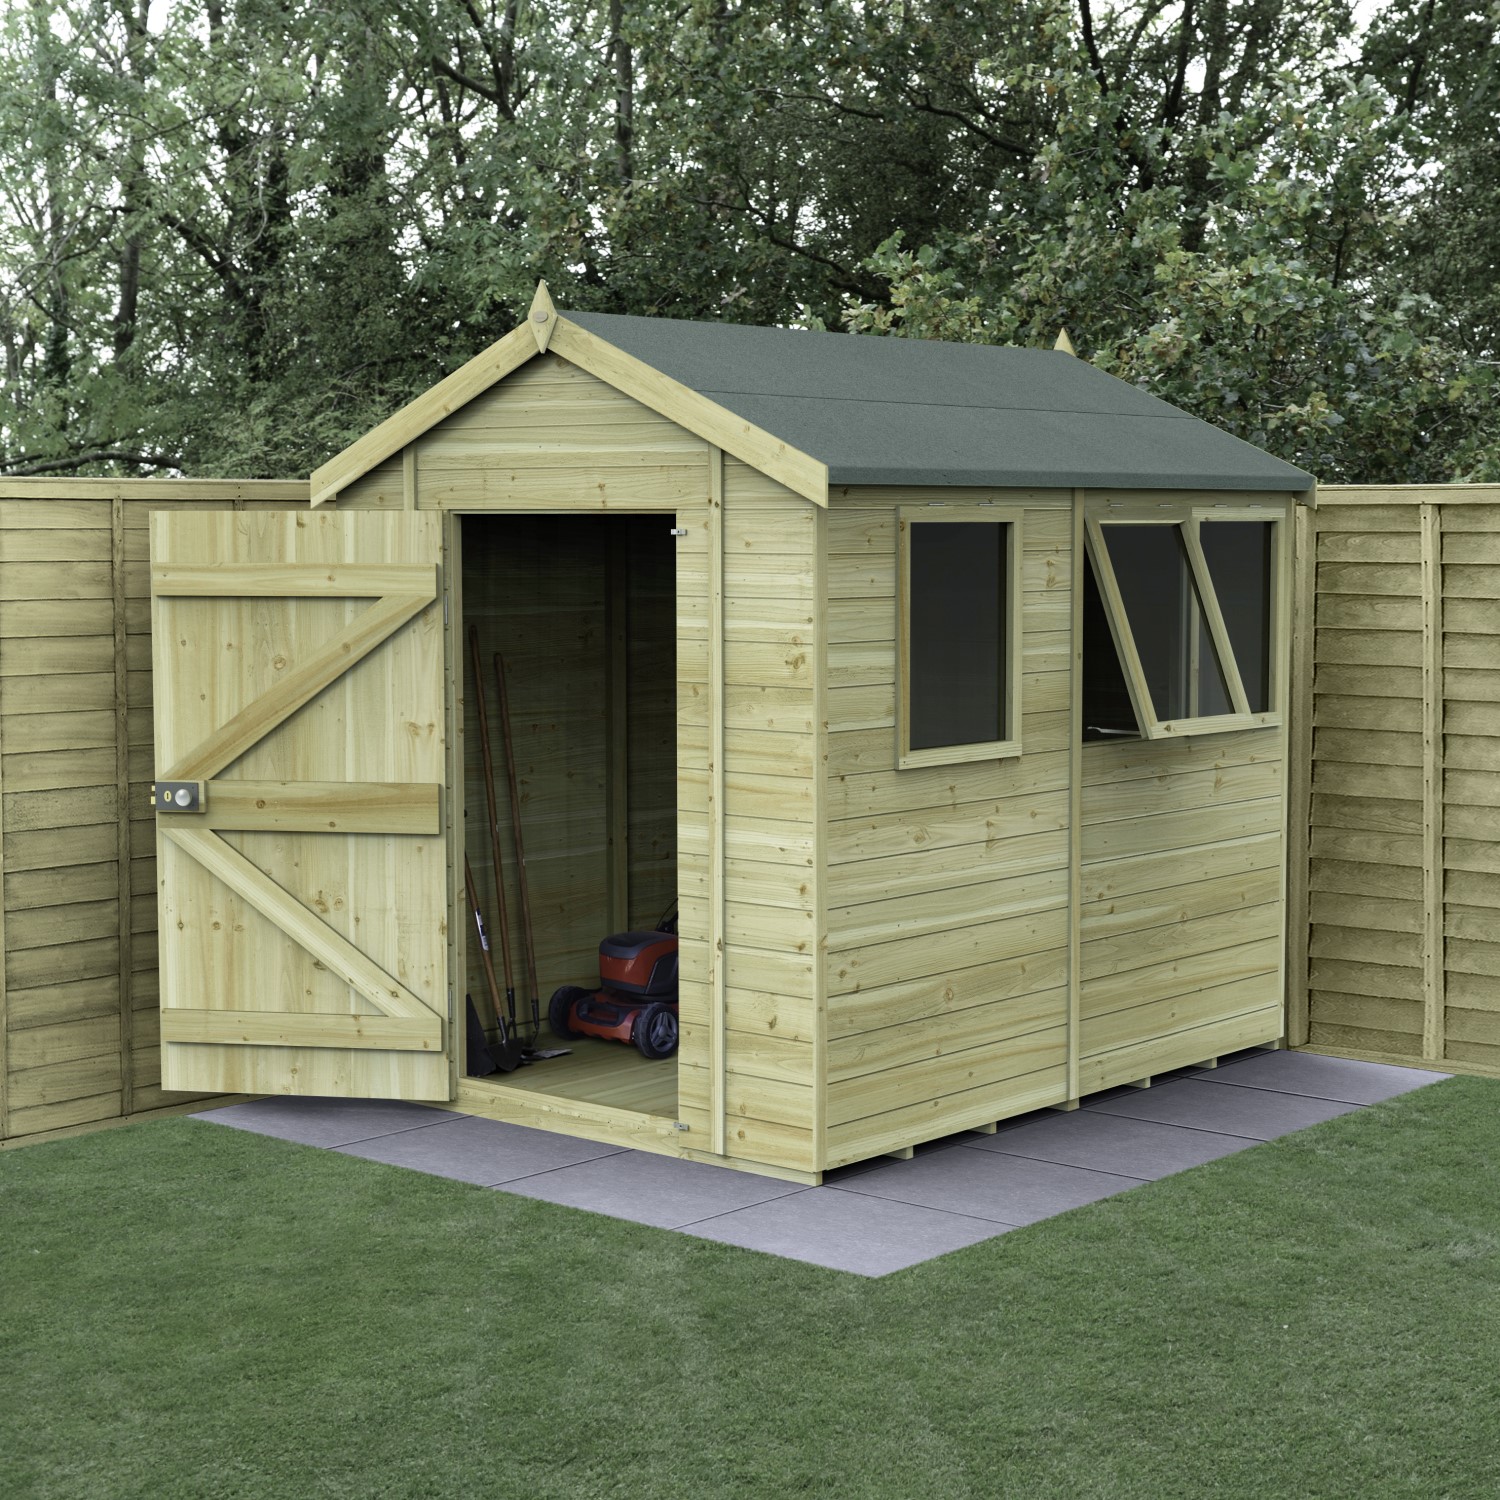 Timberdale Tongue and Groove Sheds